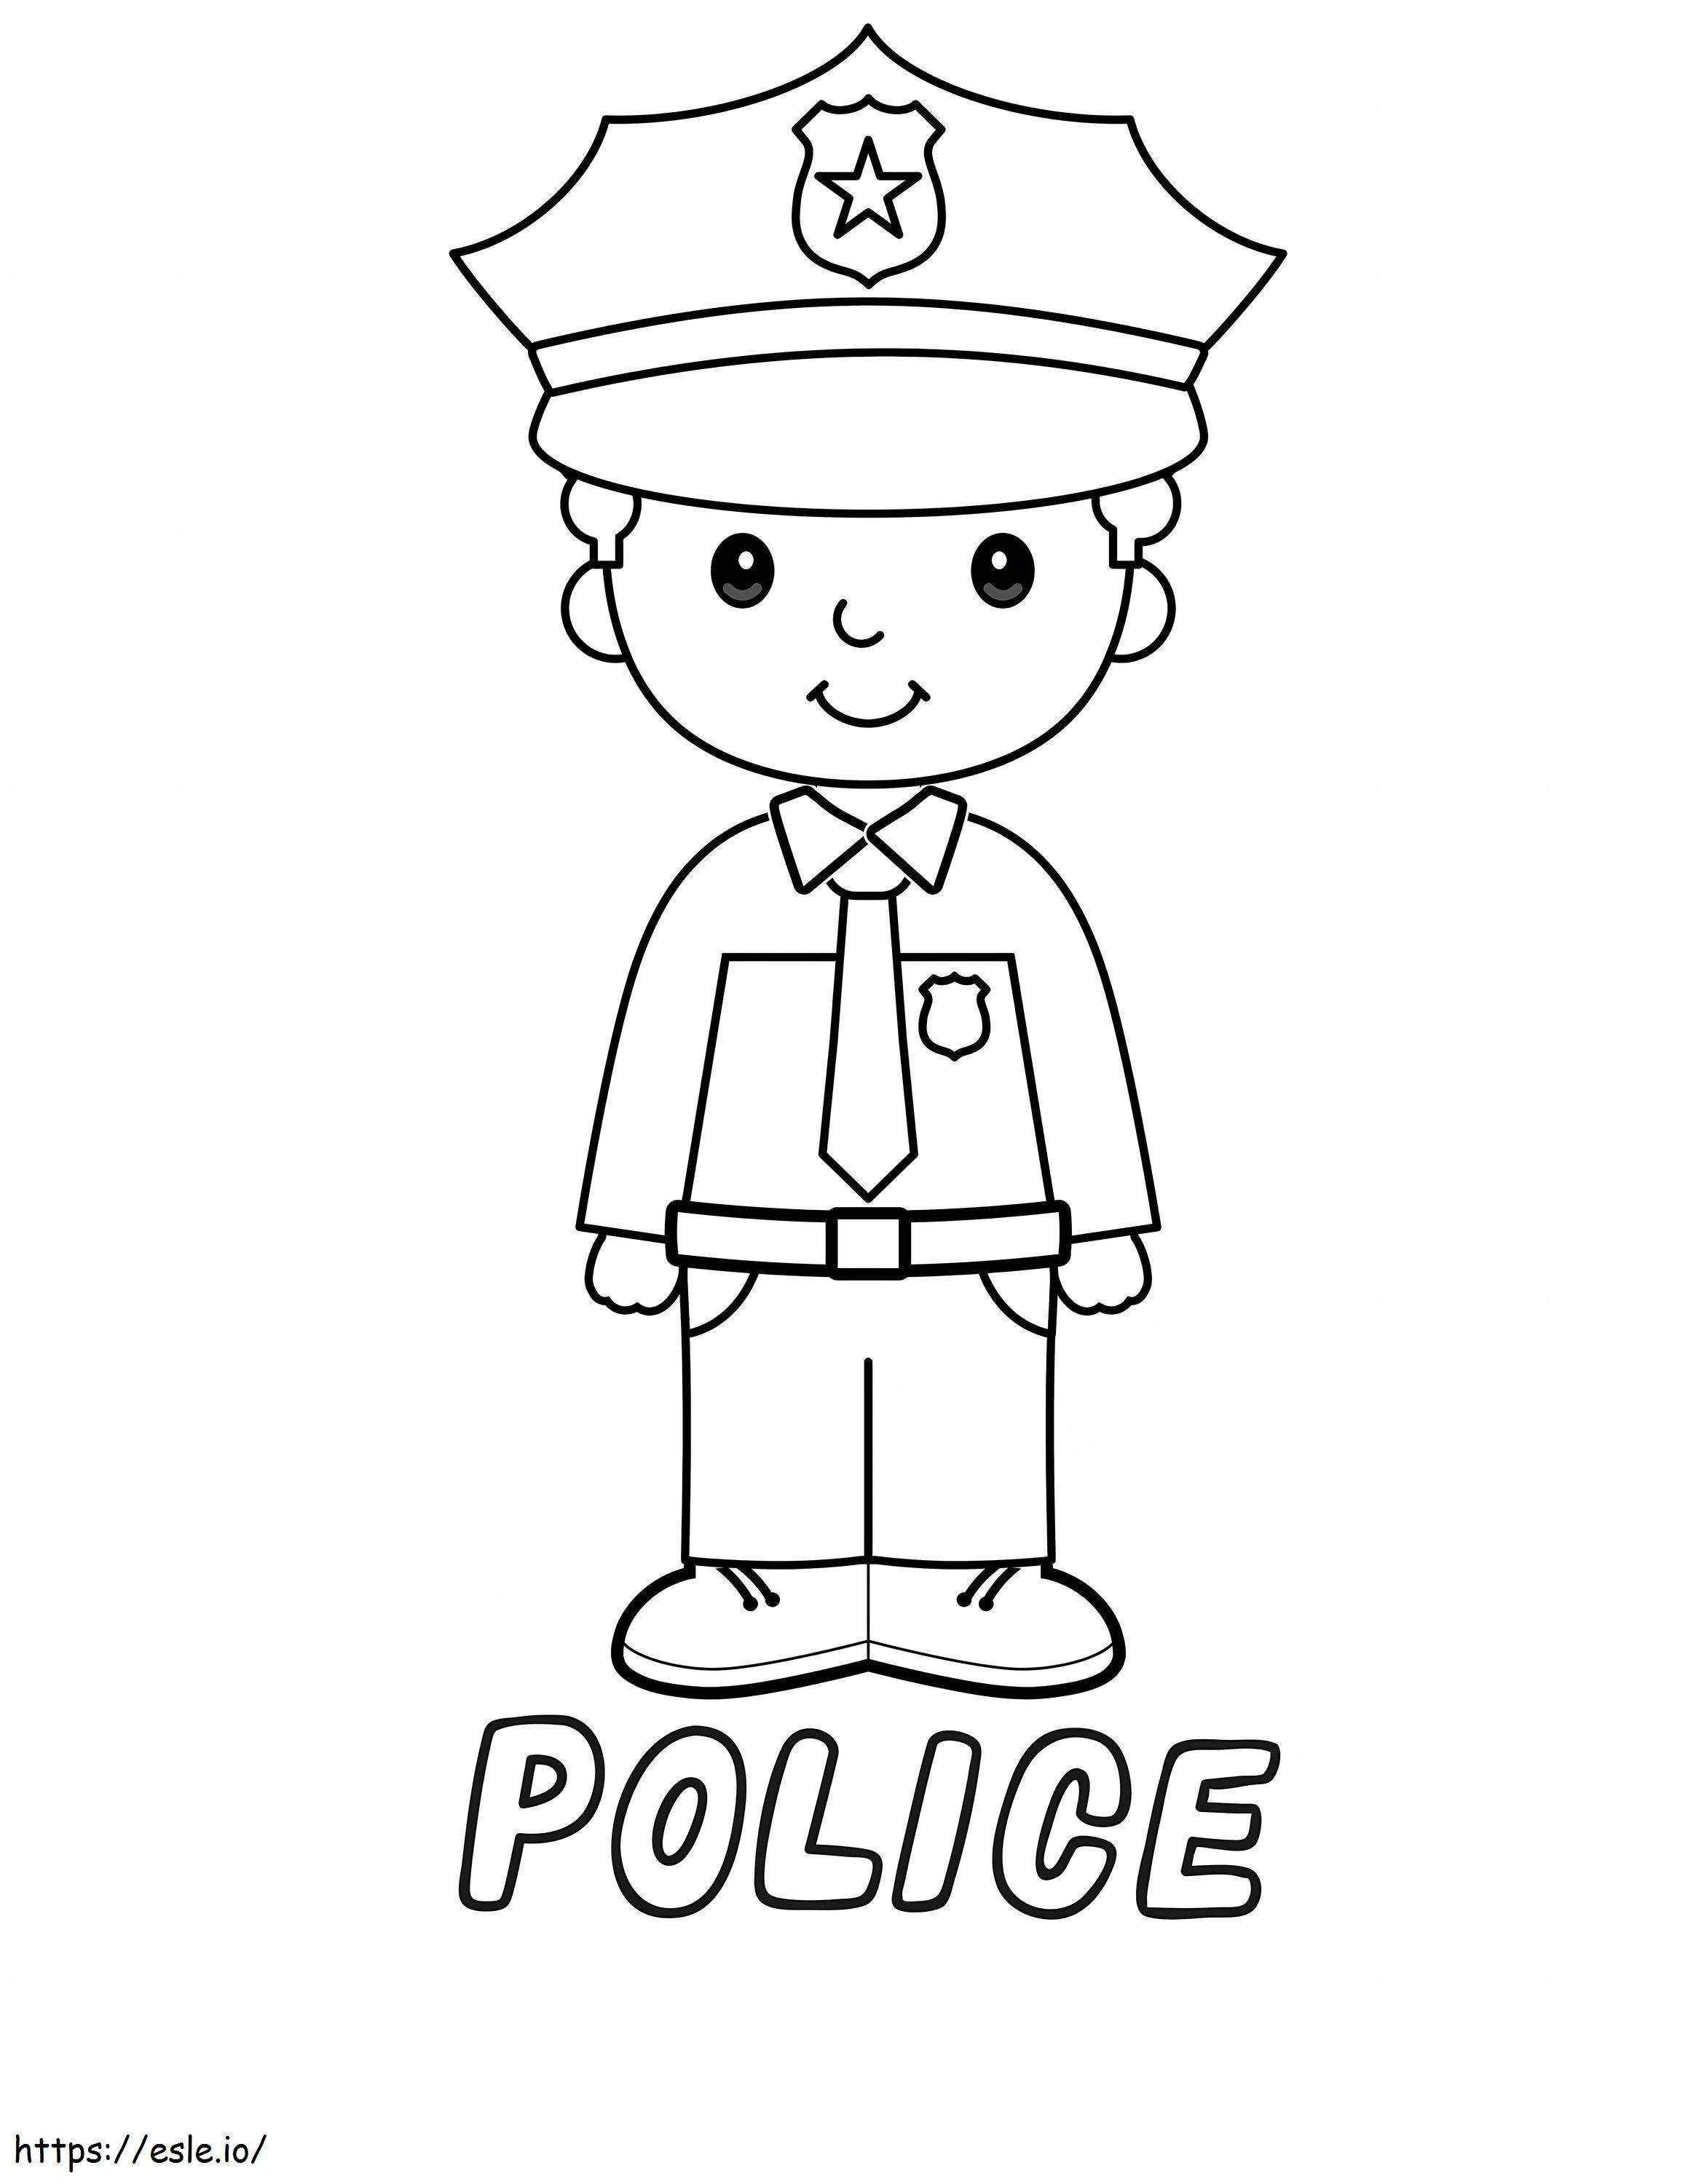 Police Officer coloring page